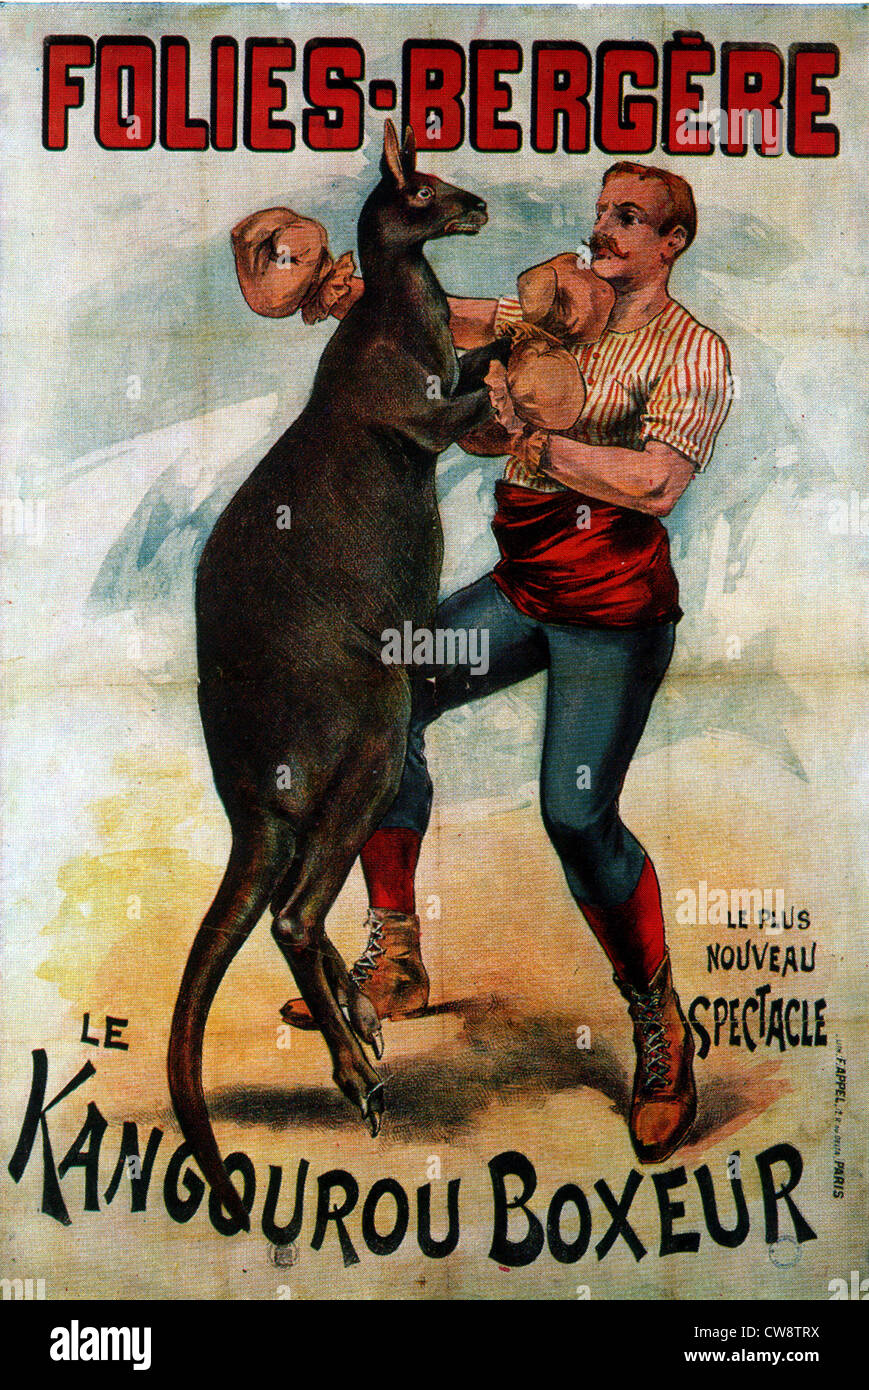 Advertising poster show at Folies-Bergère Stock Photo